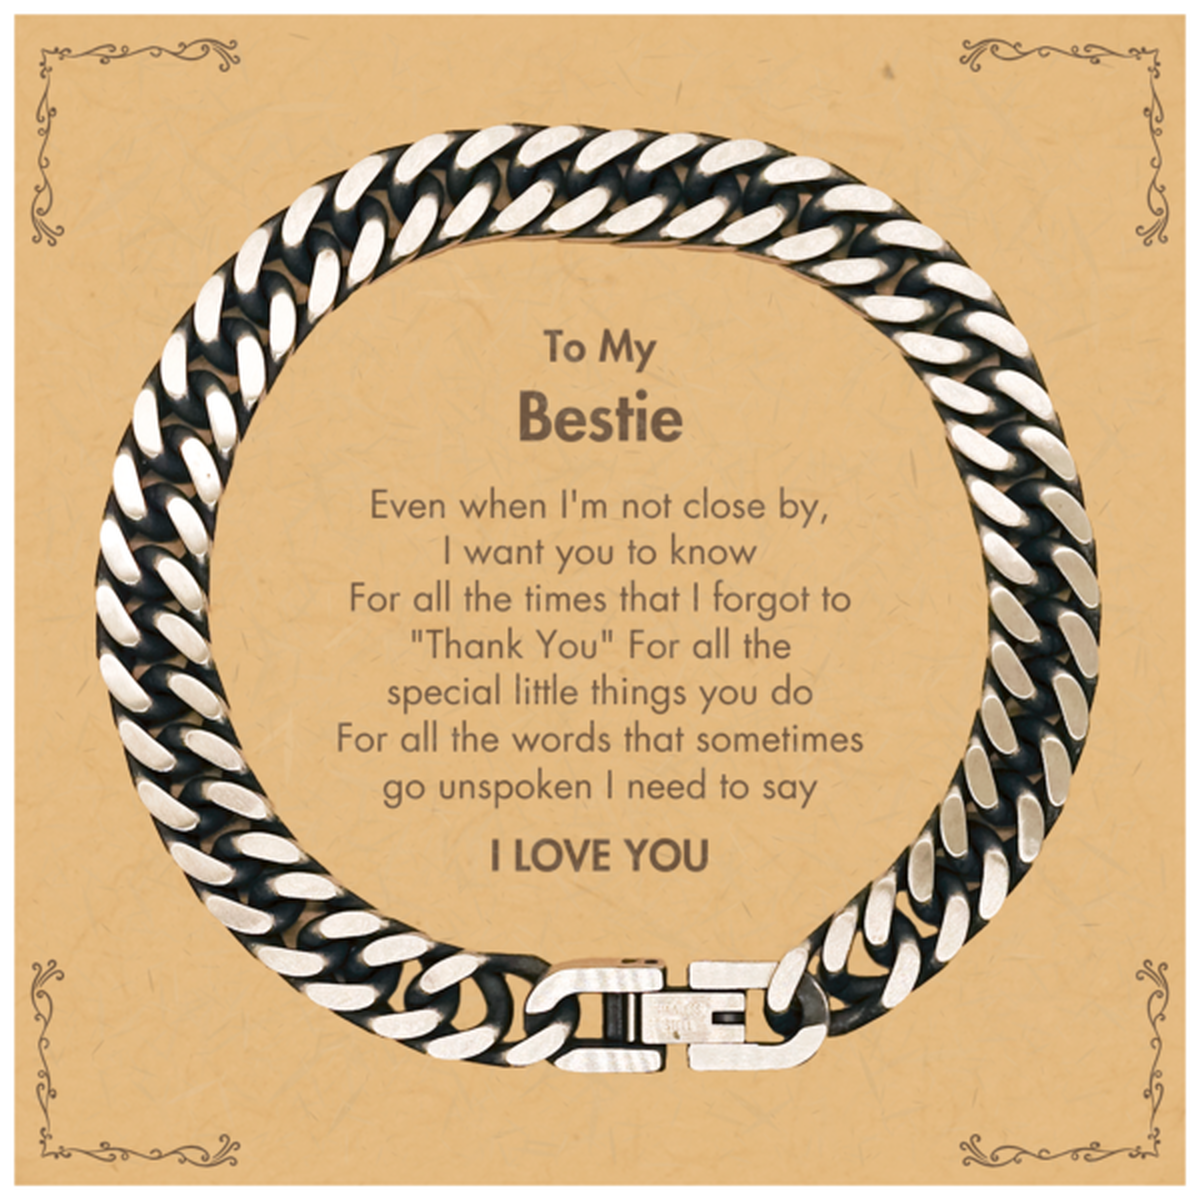 Thank You Gifts for Bestie, Keepsake Cuban Link Chain Bracelet Gifts for Bestie Birthday Mother's day Father's Day Bestie For all the words That sometimes go unspoken I need to say I LOVE YOU